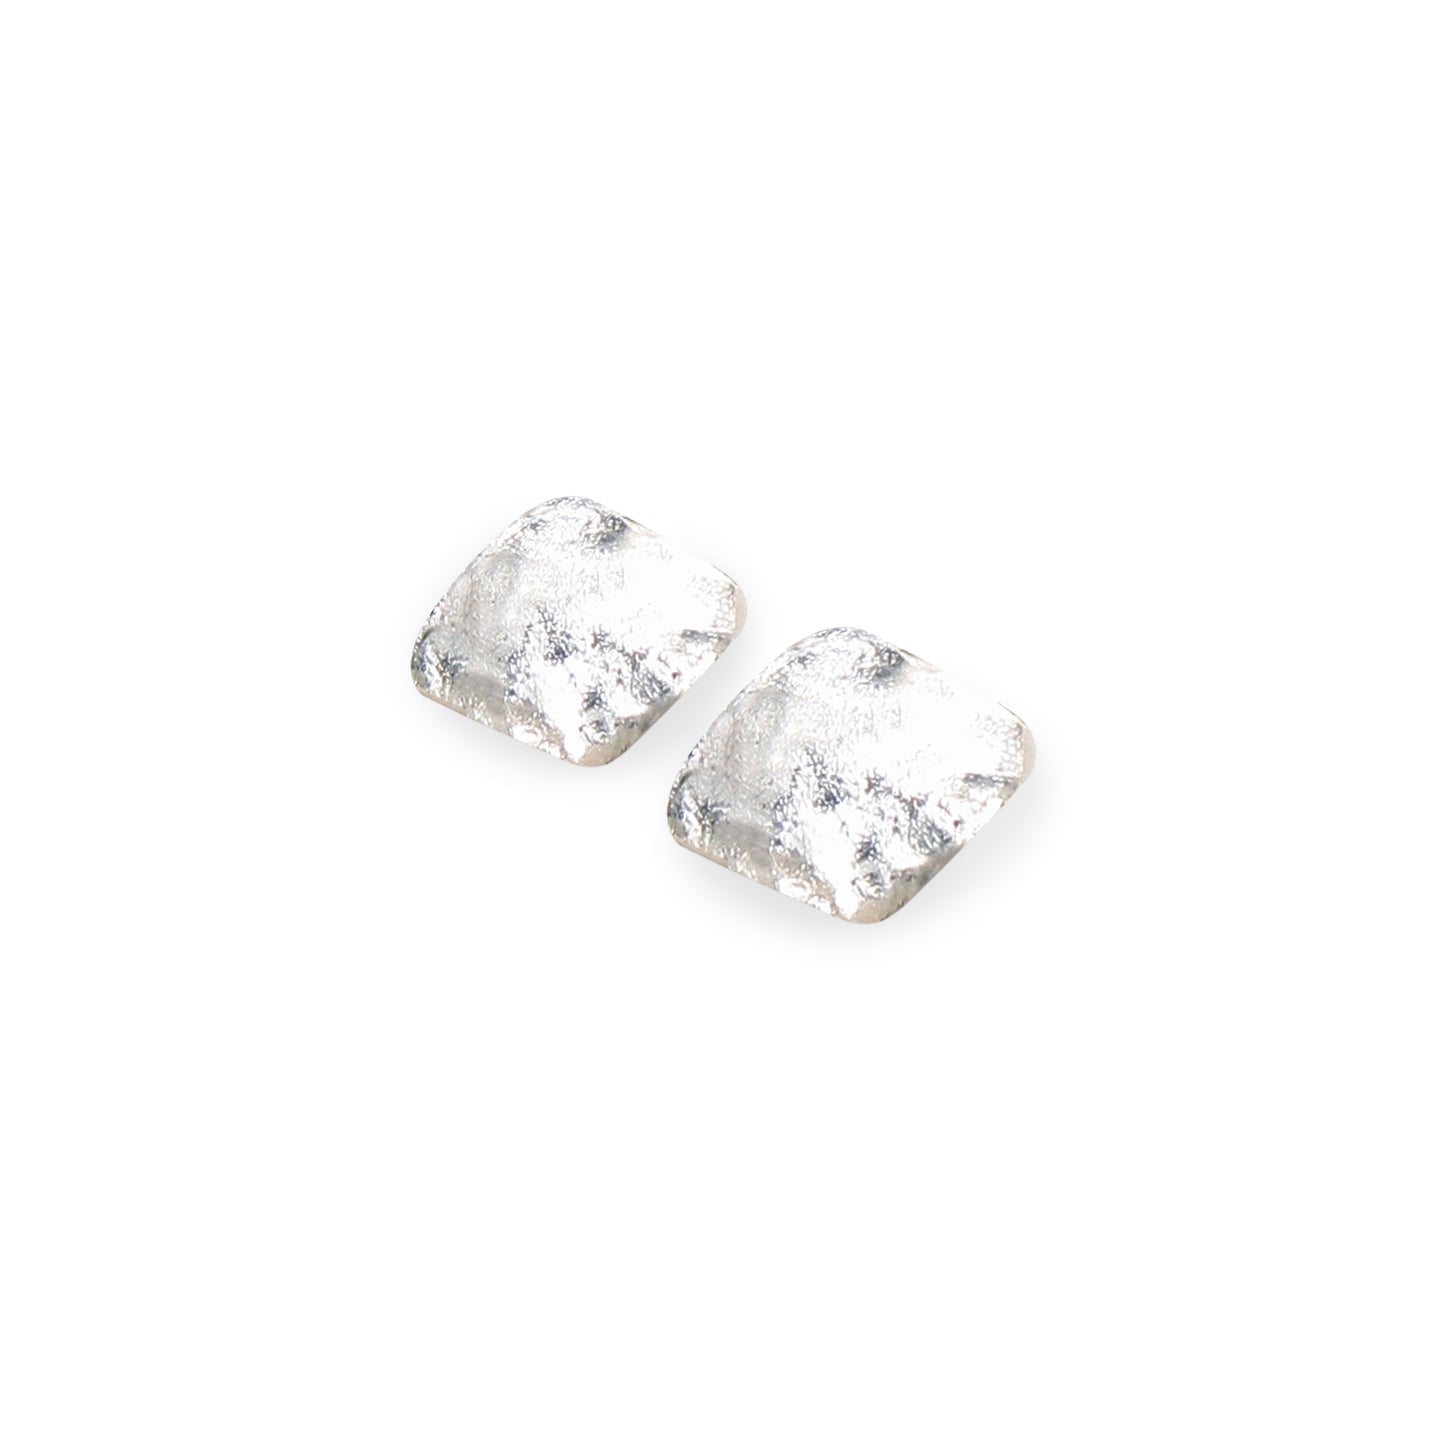 Silver Antique Square Shiny Small Stud Earrings